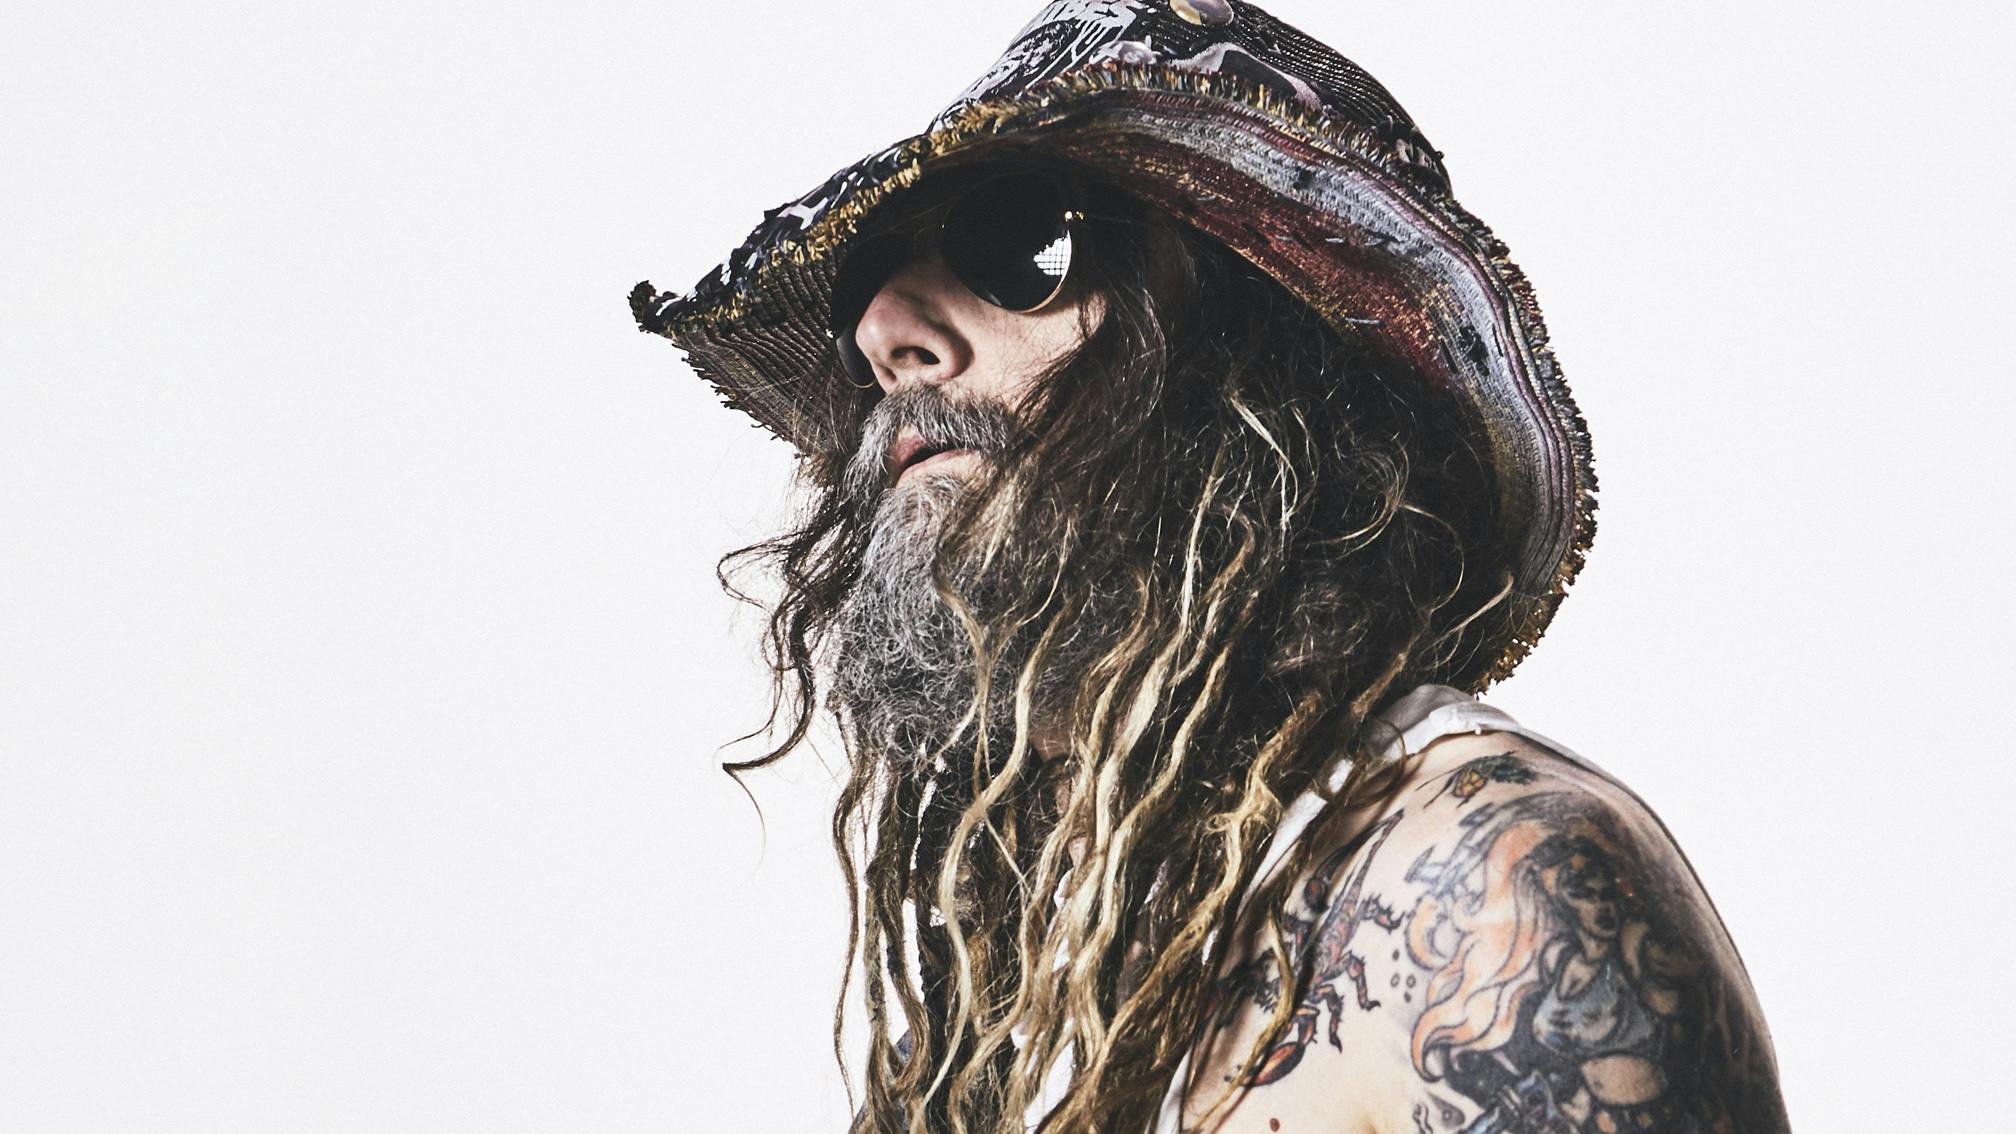 Listen to Rob Zombie's new song, The Eternal Struggles Of The Howling Man